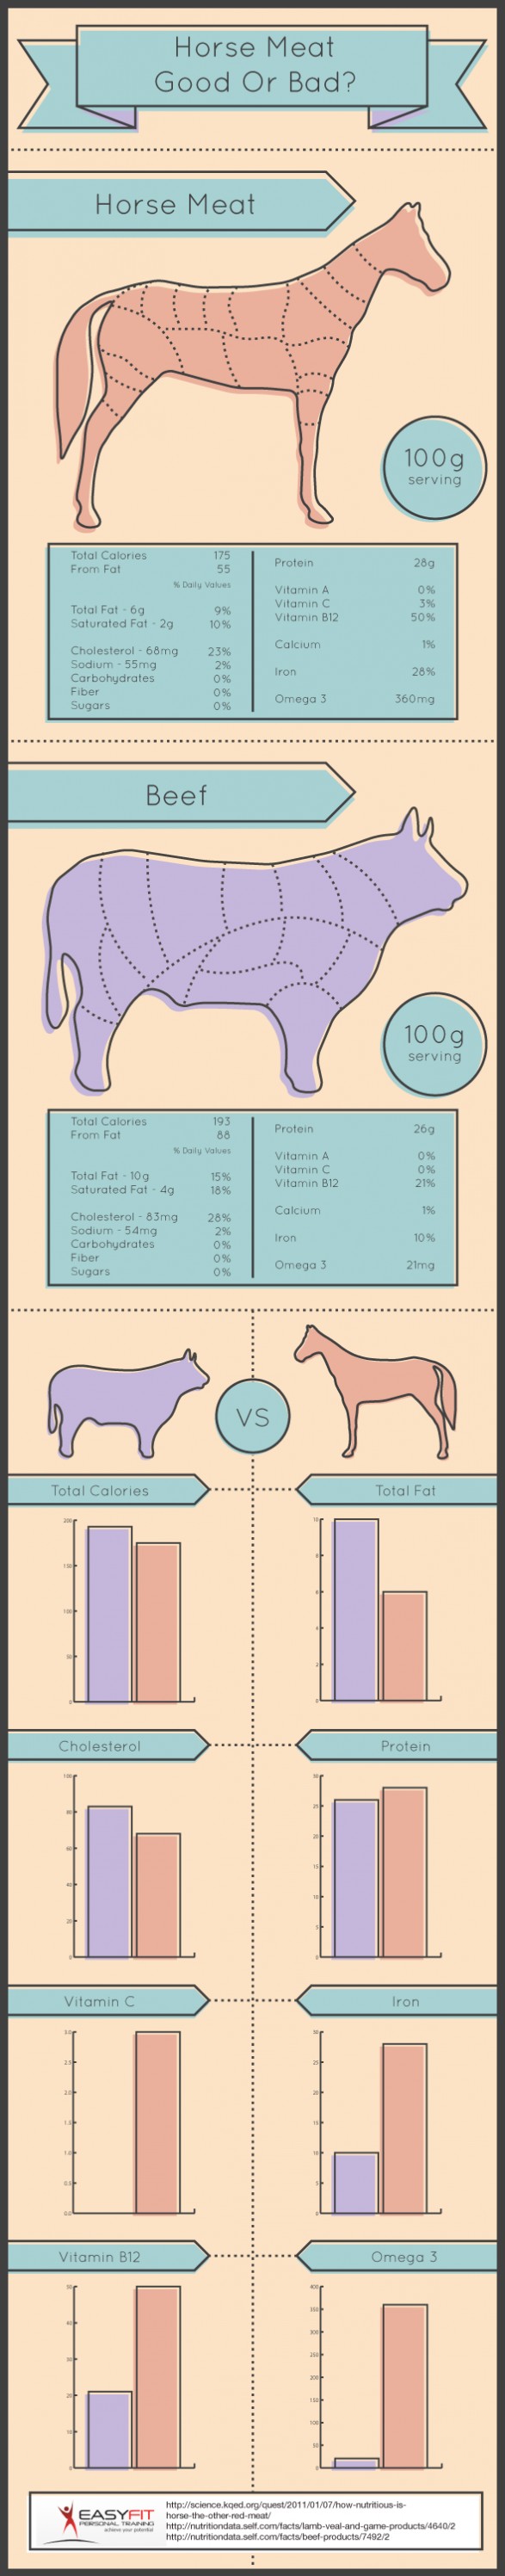 Is Horse Meat Healthy? Is It Better For Me Than Beef?